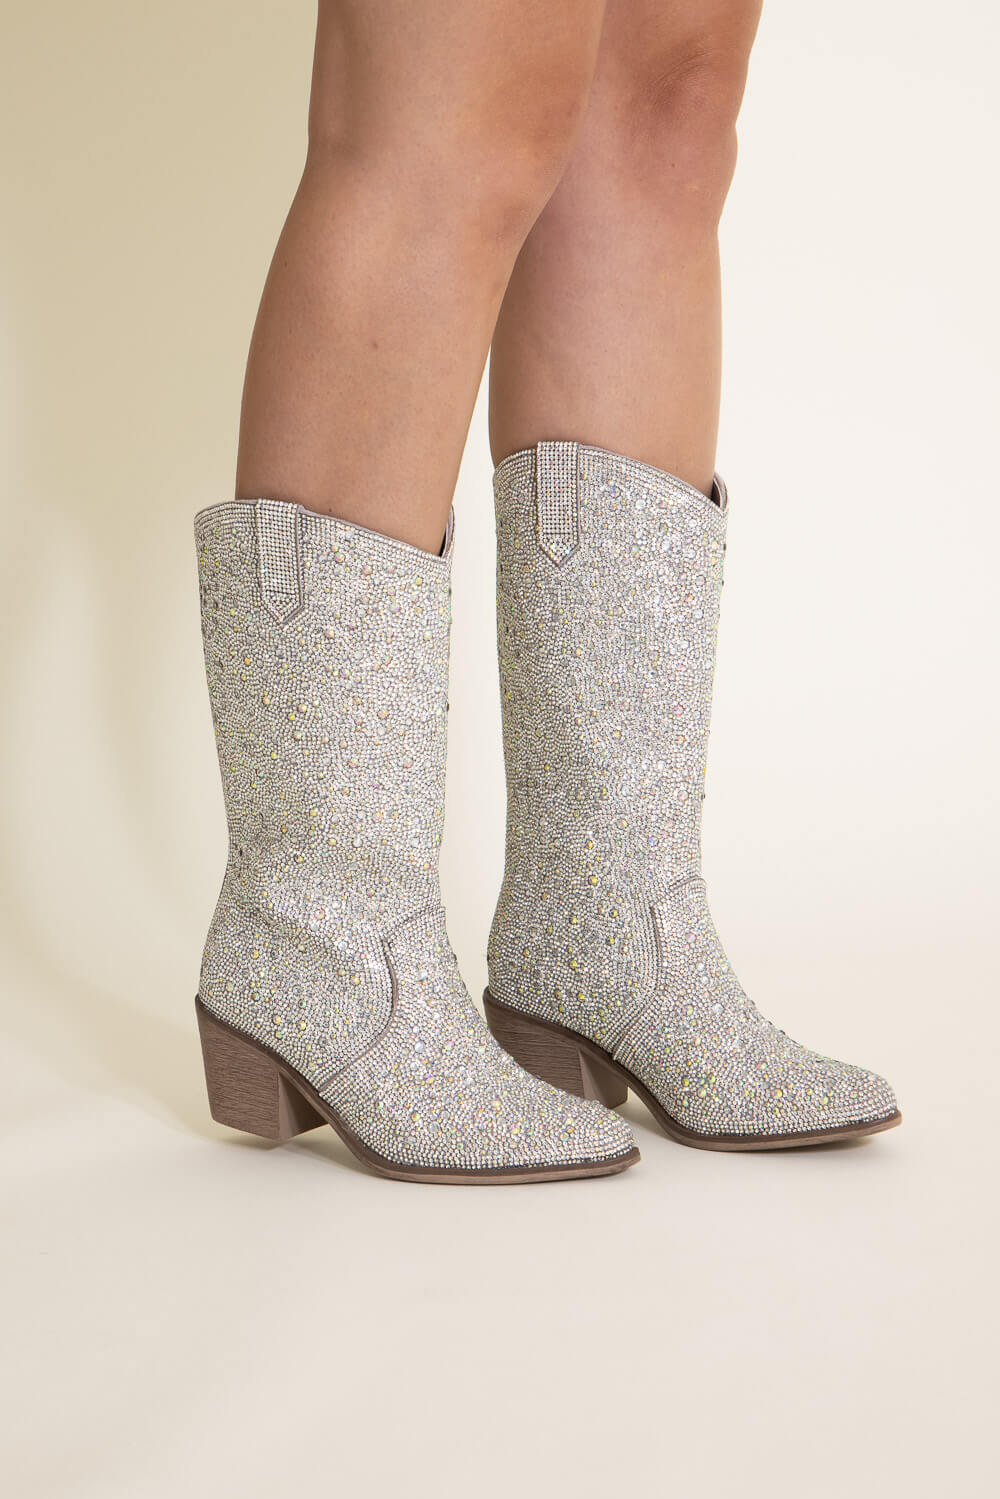 Glitter Sequin Cuffed Western Boots Womens Block Heel Pointed Toe Mid Calf  Boots